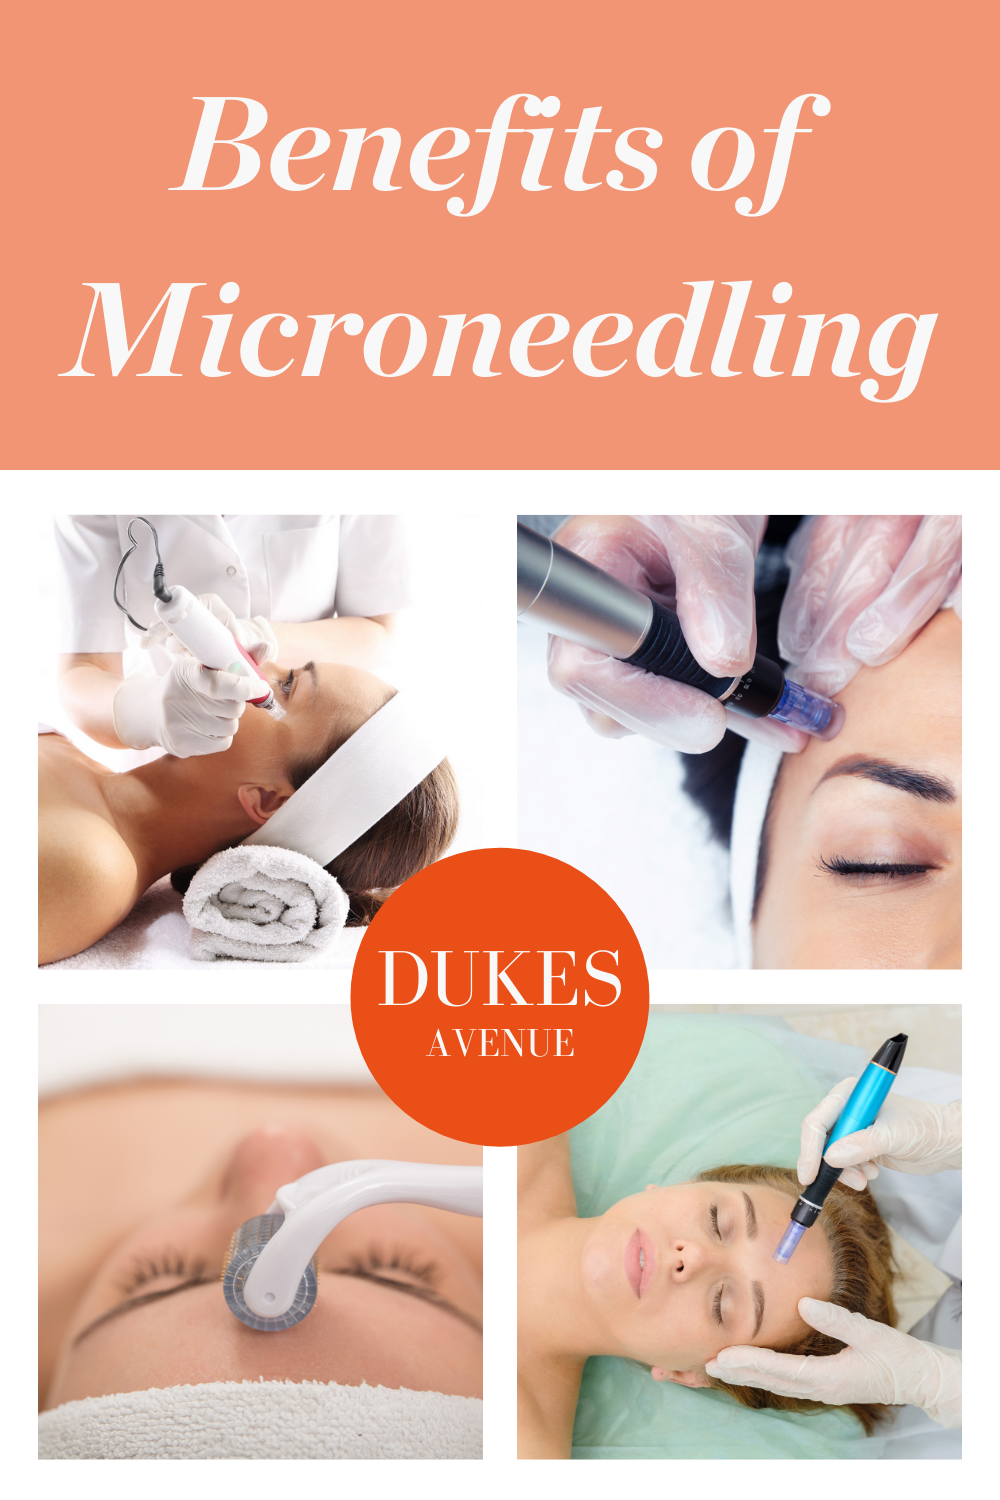 Four images of women getting microneedling treatment with text overlay 'Benefits of Microneedling'